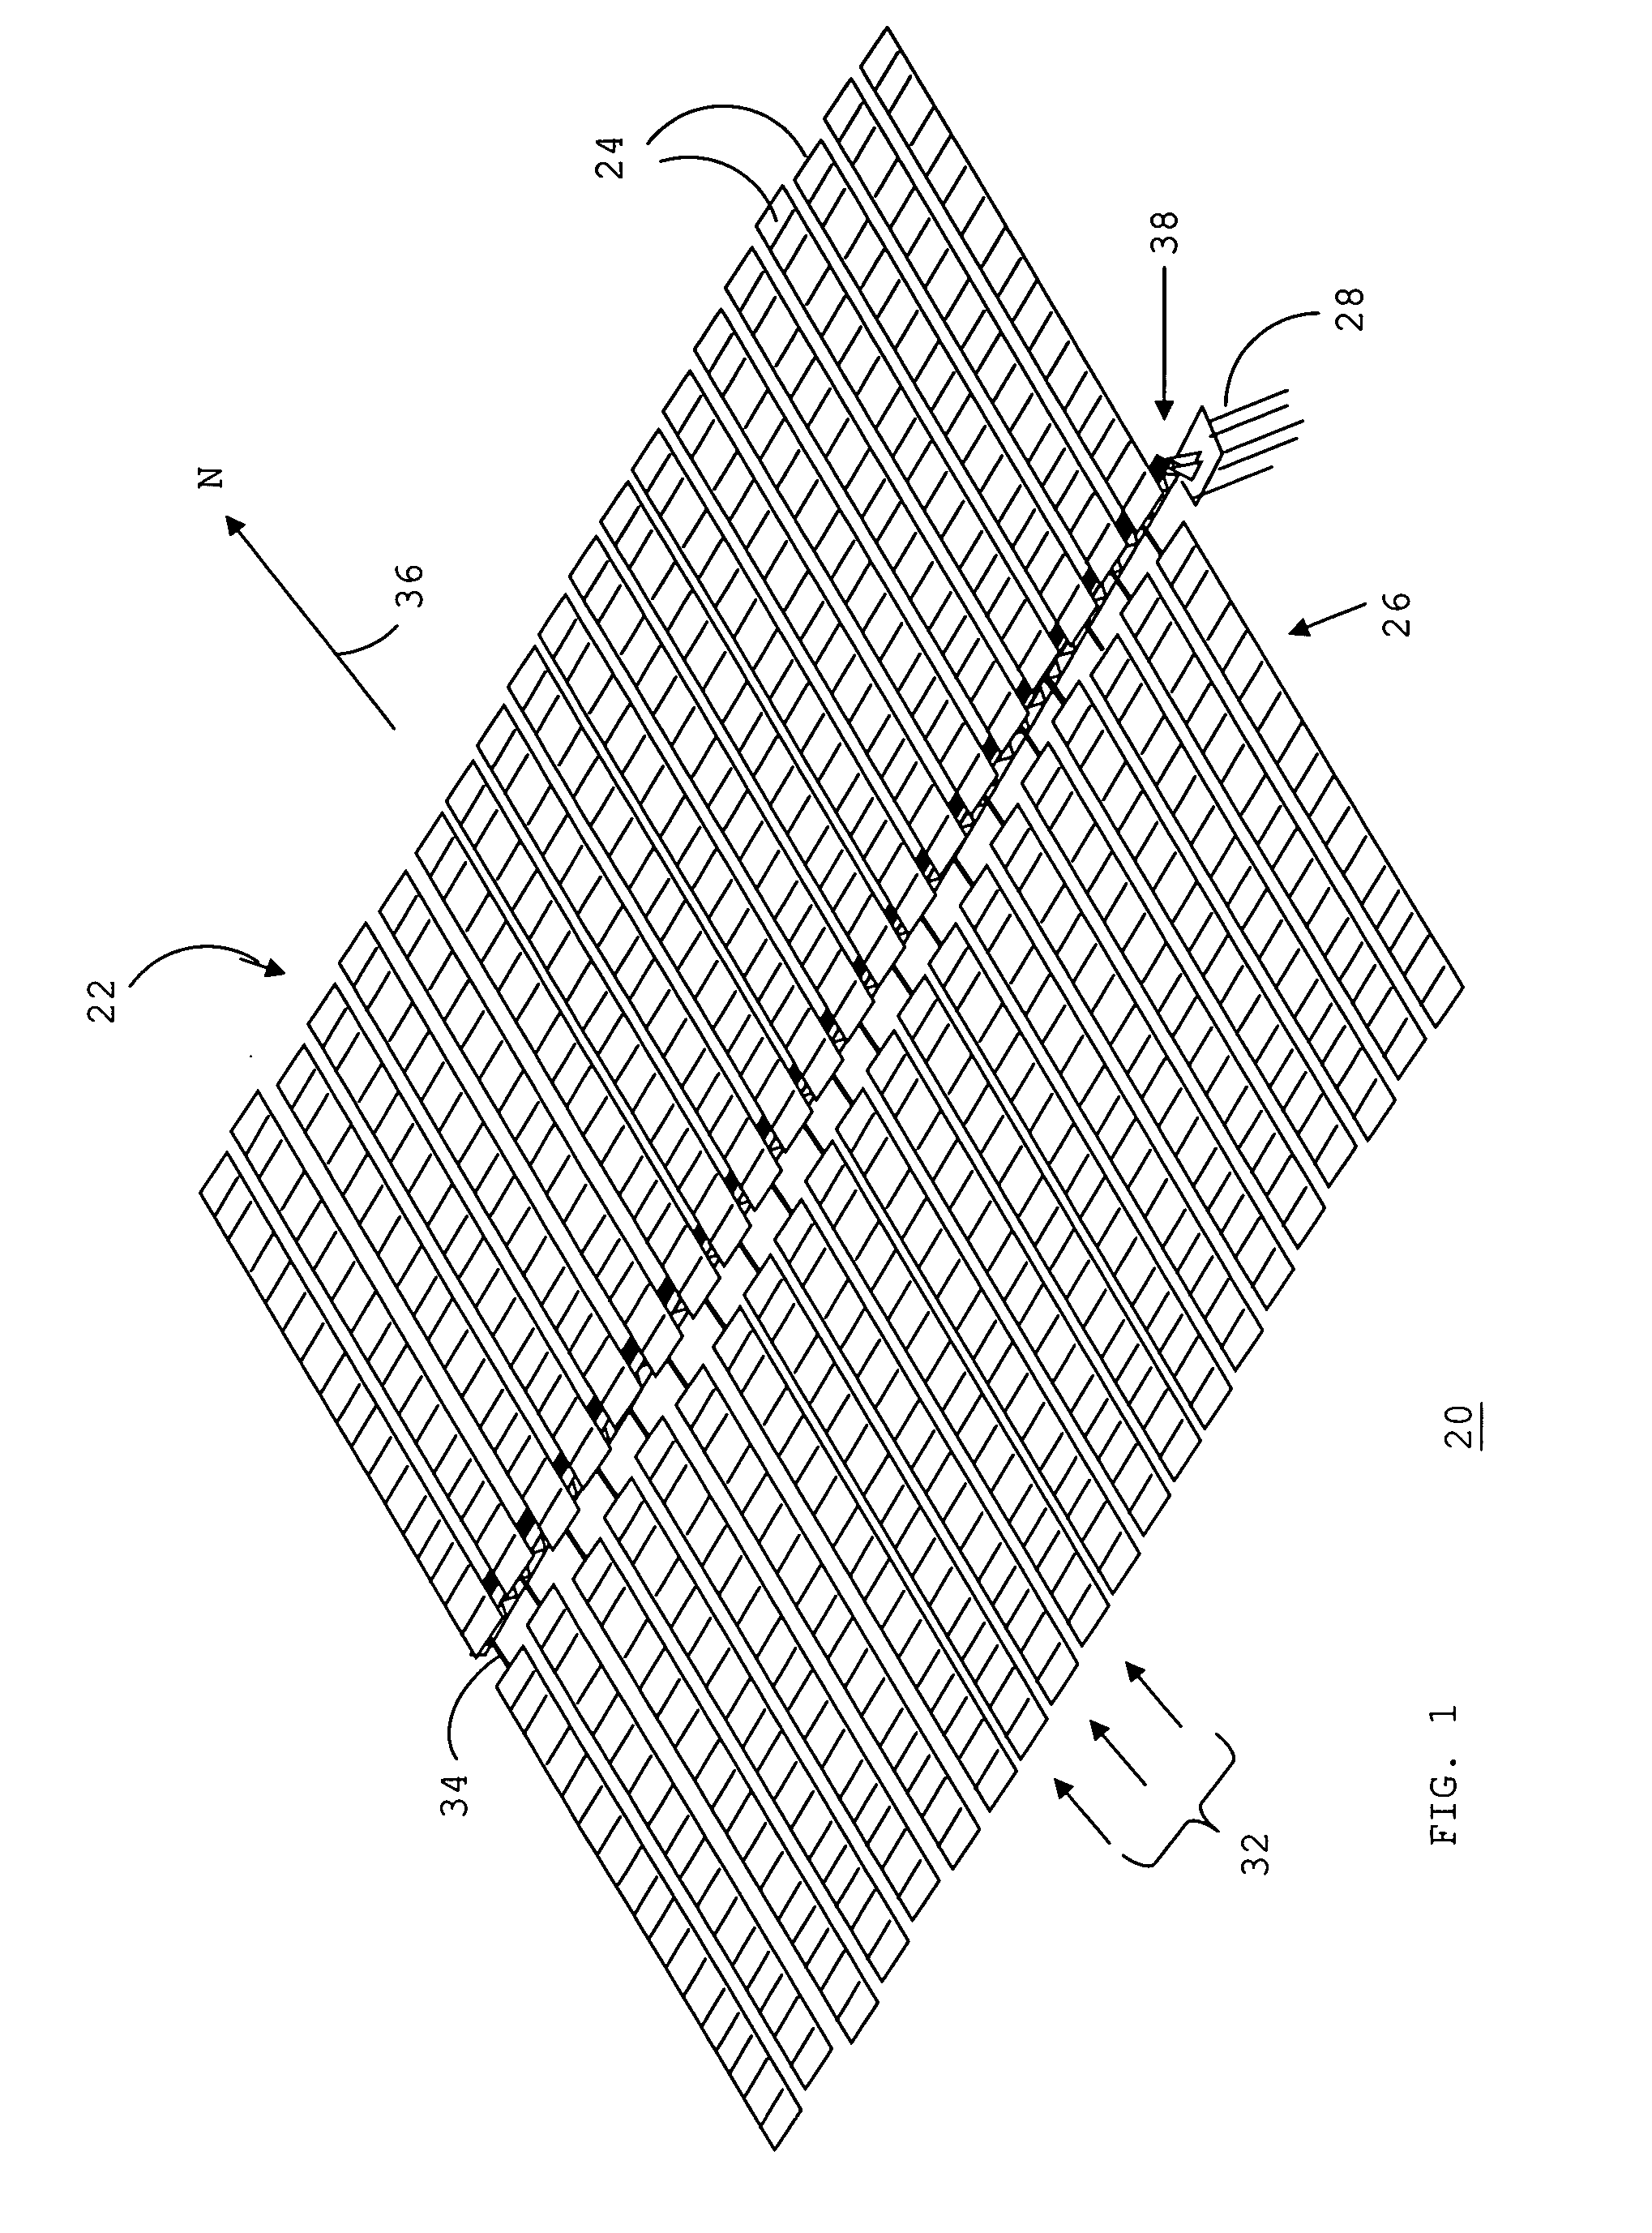 Structure for supporting energy conversion modules and solar energy collection system